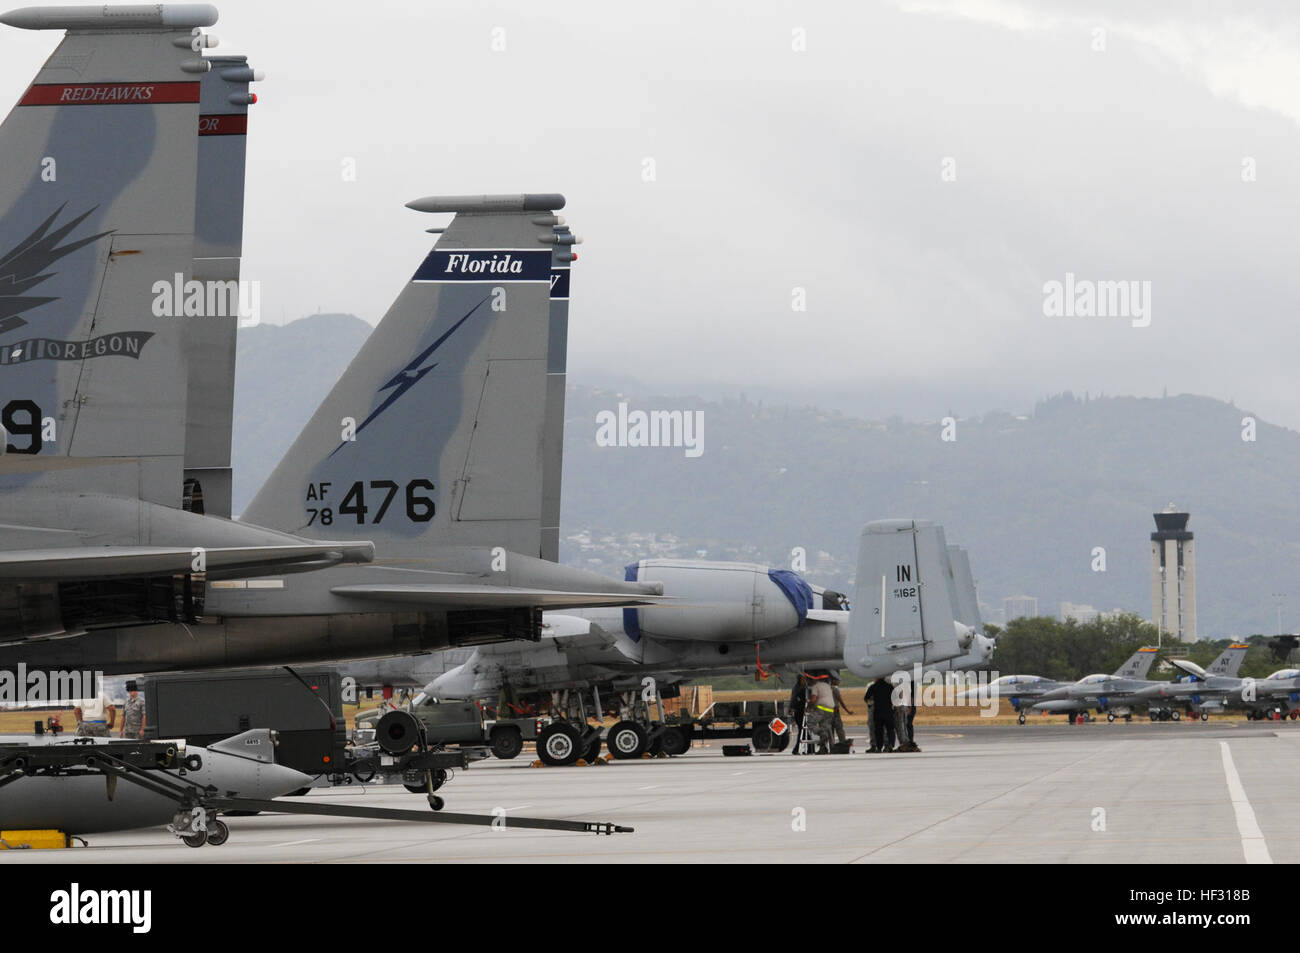 F-15 Eagles from Oregon and Florida, and A-10 Thunderbolts and F-16 Fighting Falcons from Arizona line the flight line at Joint Base Pearl Harbor-Hickam, Hawaii, March 4, 2015. The aircraft are participating in the Hawaii Air National Guard's Sentry Aloha fighter exercise. Sentry Aloha's mission is to provide the ANG, Air Force and DOD counterparts with multifaceted, realistic and integrated training to equip the warfighter with the skillsets necessary to fly, fight and win. (U.S. Air National Guard photo by Senior Airman Orlando Corpuz) Sentry Aloha pits fighter vs. fighter 150304-Z-PW099-006 Stock Photo